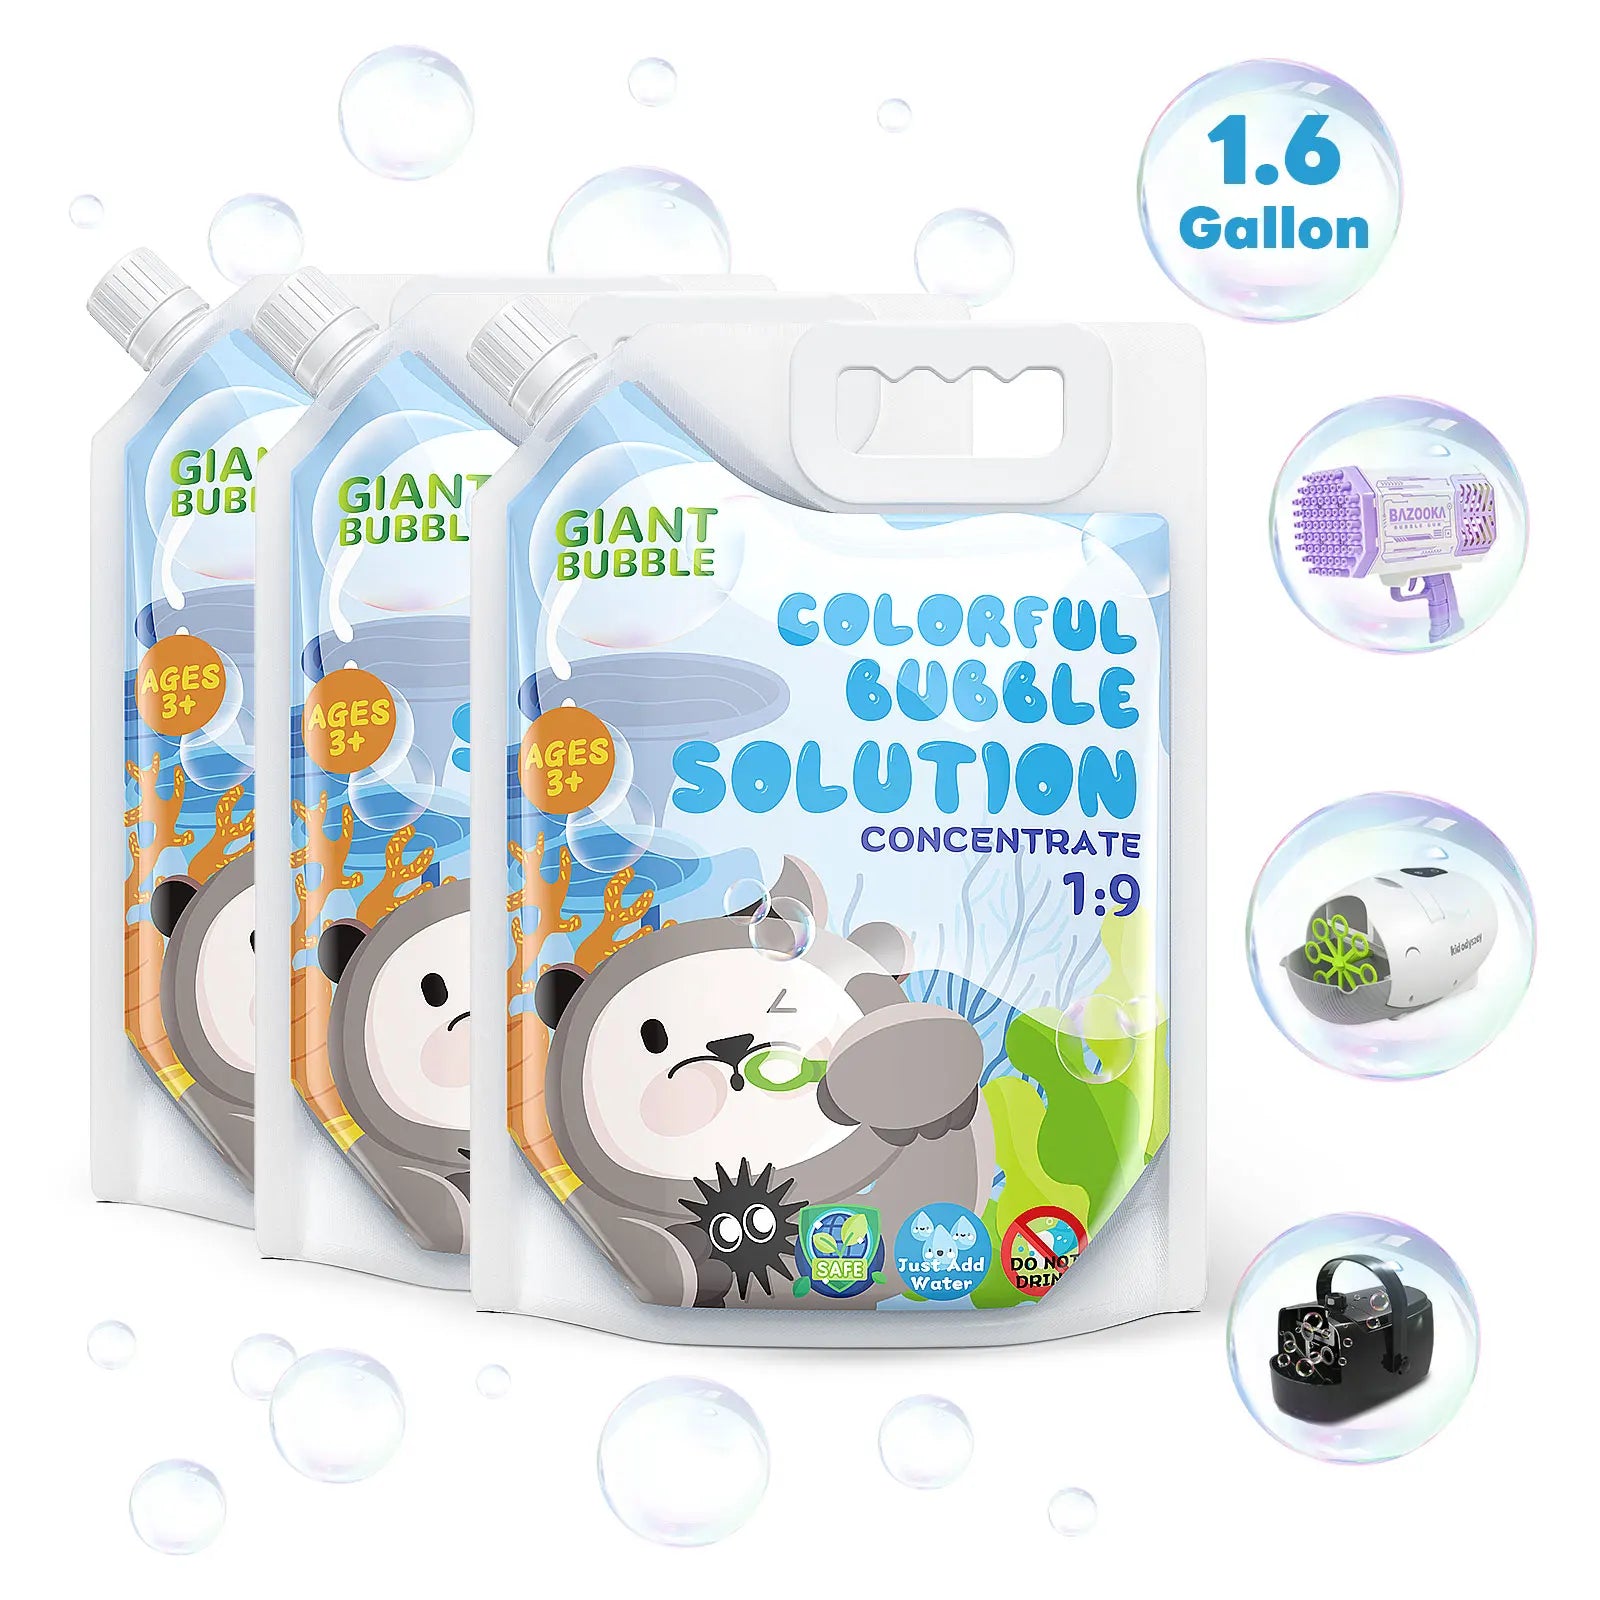 B10 Concentrated Bubble Solution Refill